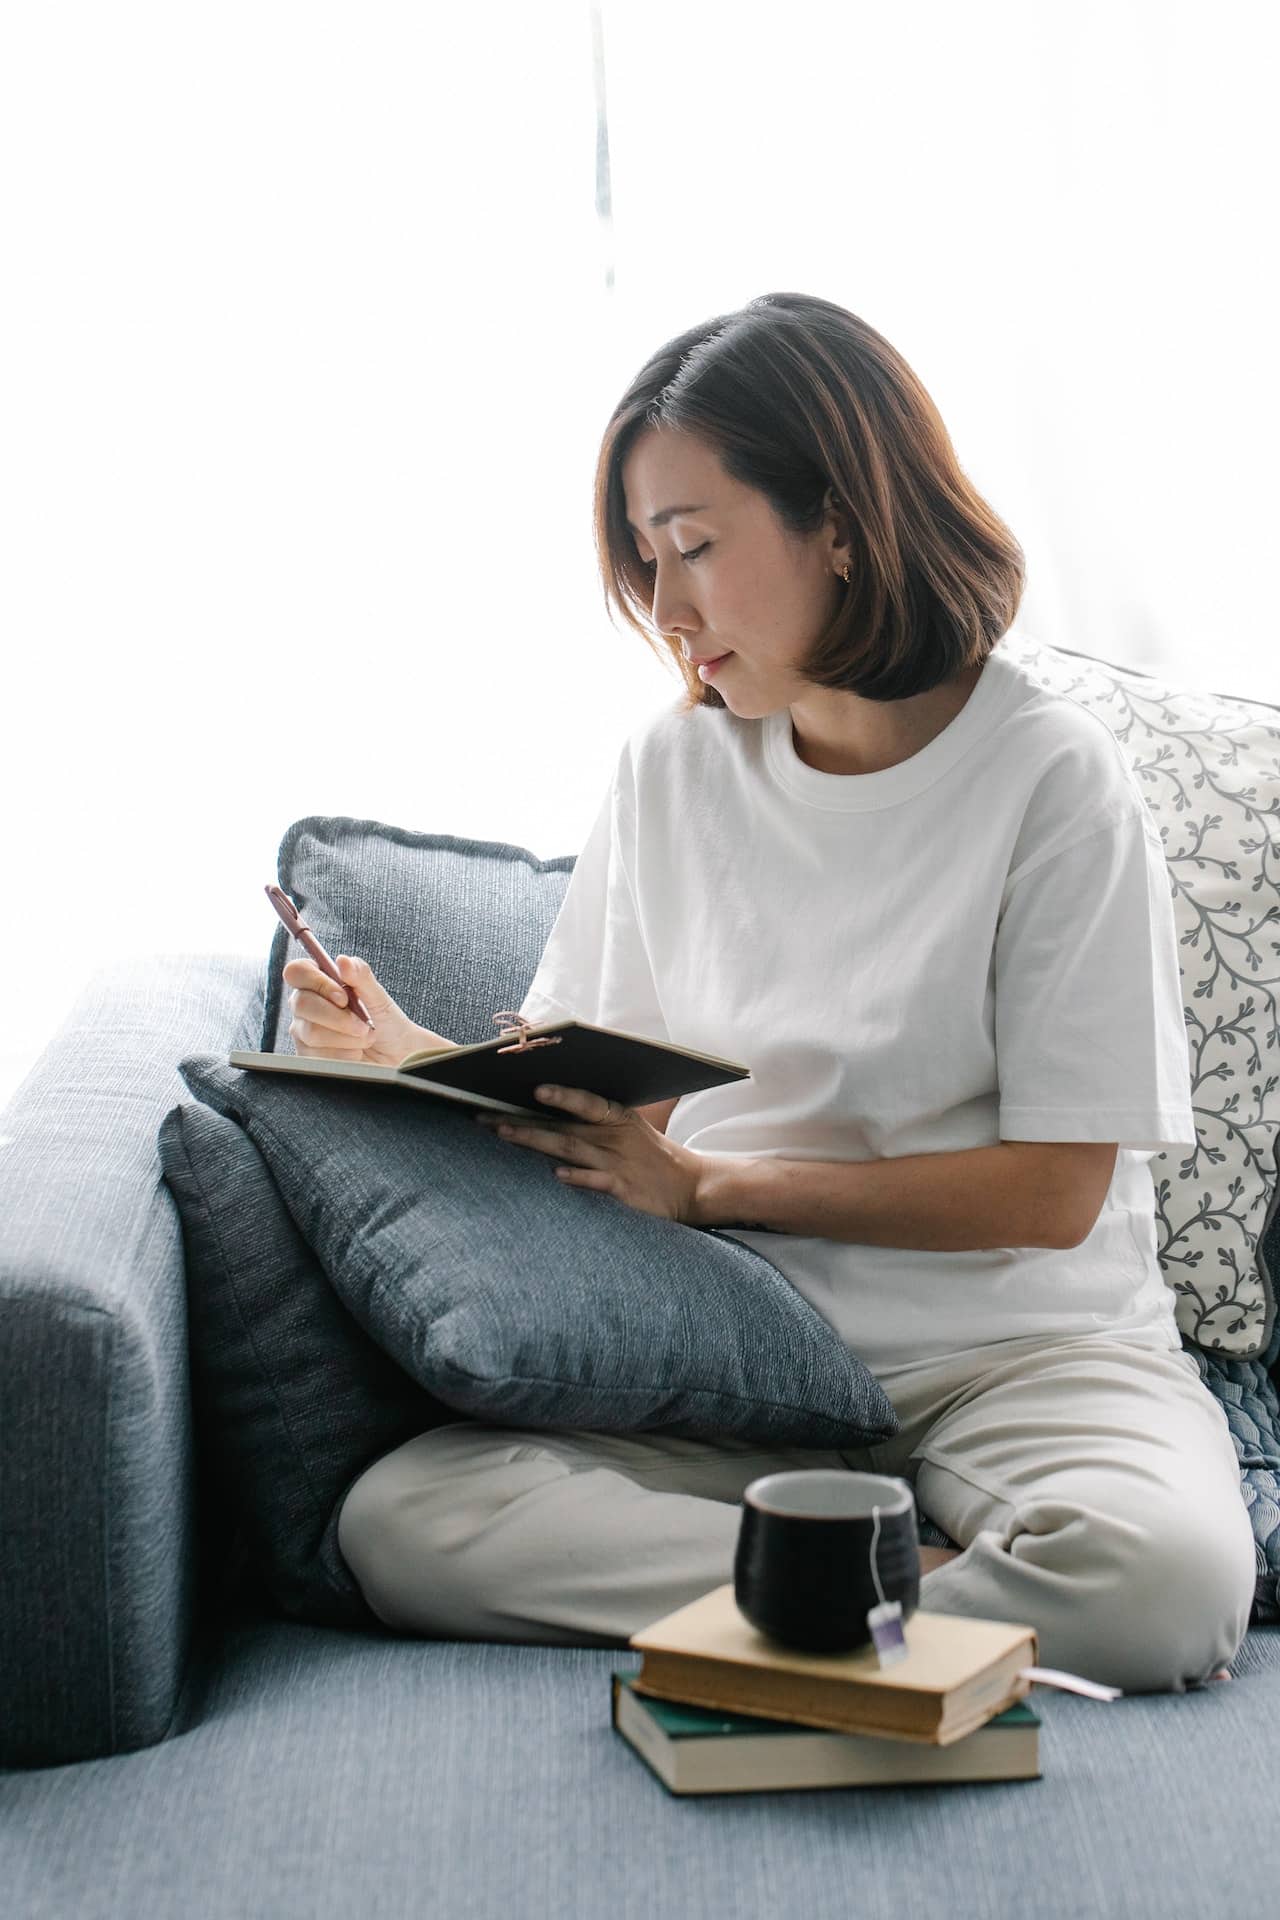 Asian American woman sits on a sofa by the window writing in her jorunal. A cup of tea and some books are in the foreground.